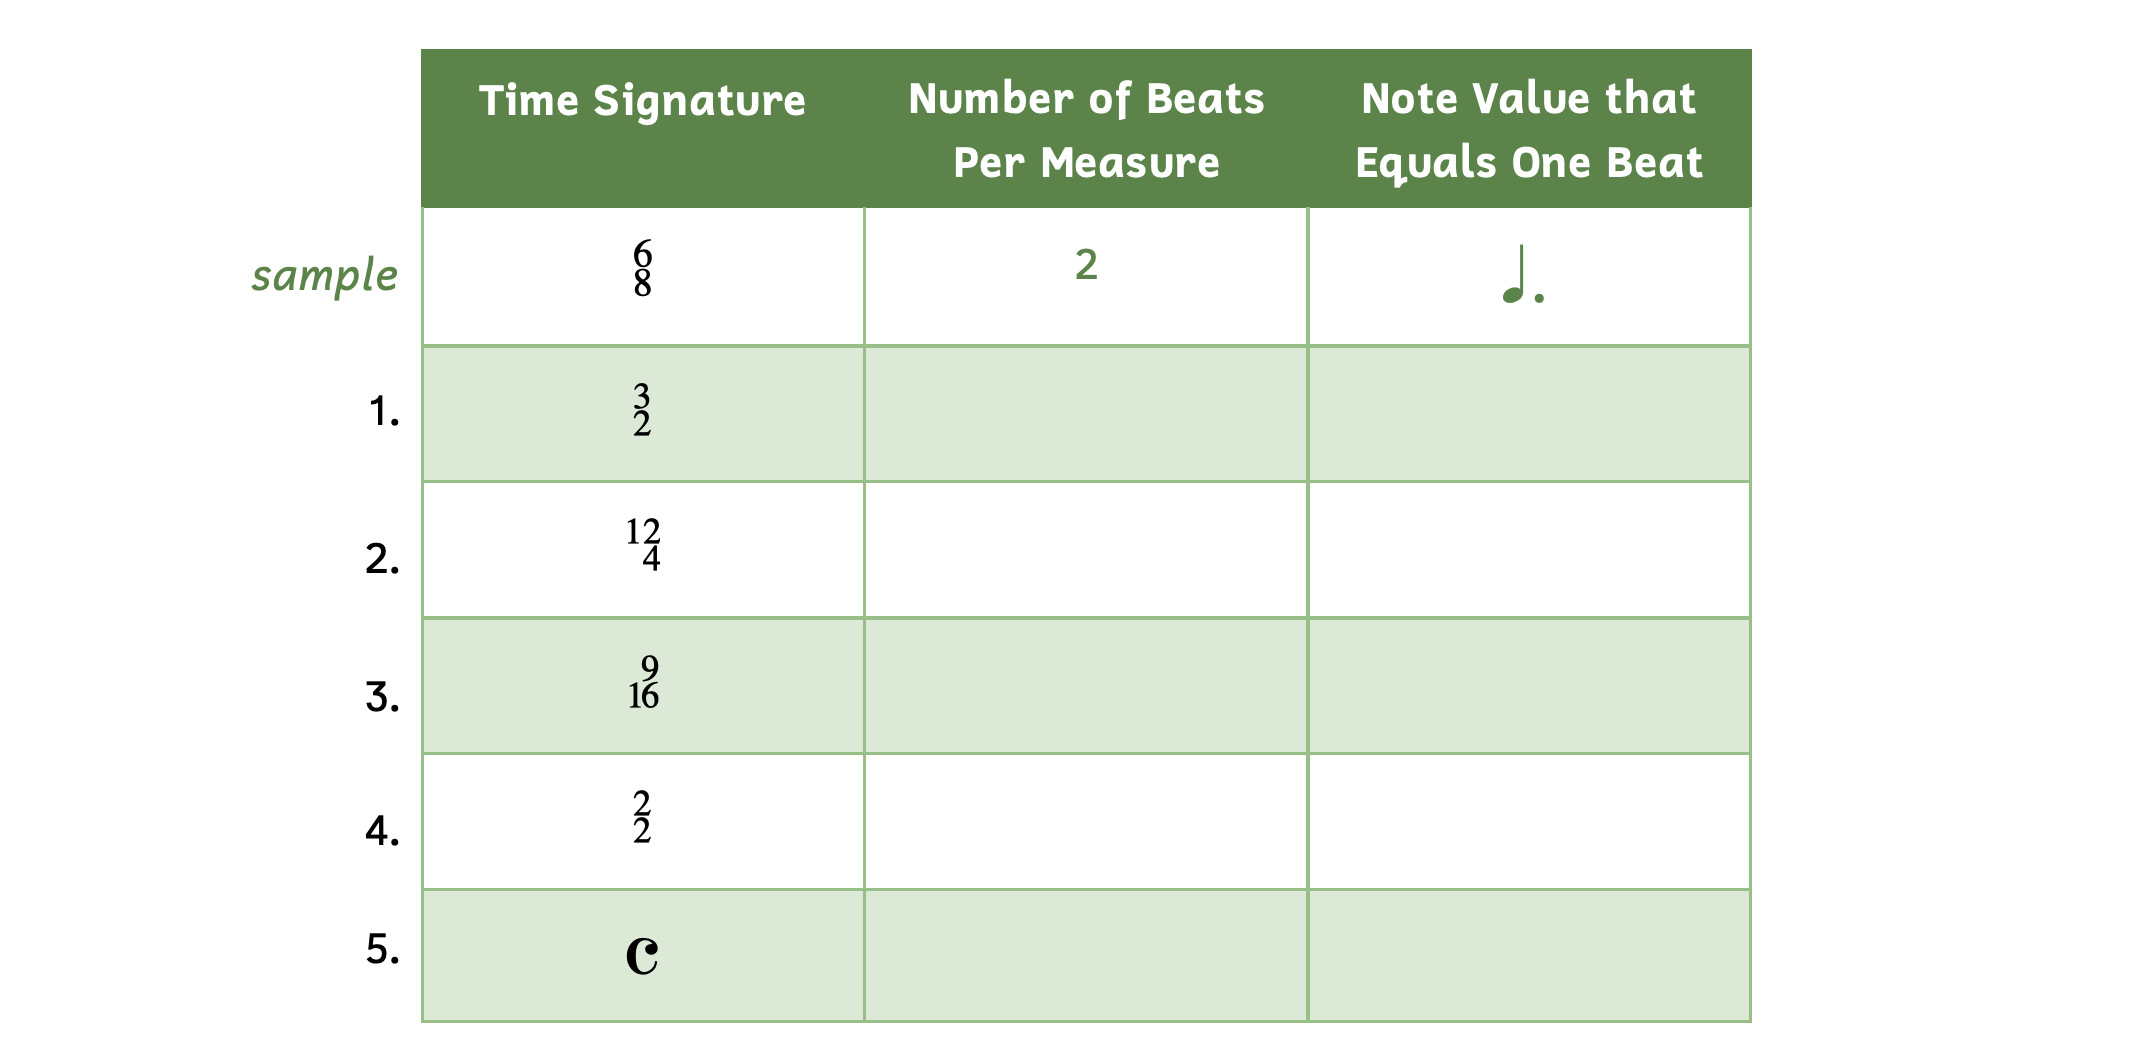 The first column lists the time signature. The second column asks for the number of beats per measure. The third column asks for the note value that equals one beat. The same is the time signature 6-8. There are 2 beats per measure and the dotted quarter note gets one beat. Number 1 is the time signature 3-2. Number 2 is the time signature 12-4. Number 3 is the time signature 9-16. Number 4 is the time signature 2-2. Number 5 is the time signature of common time.